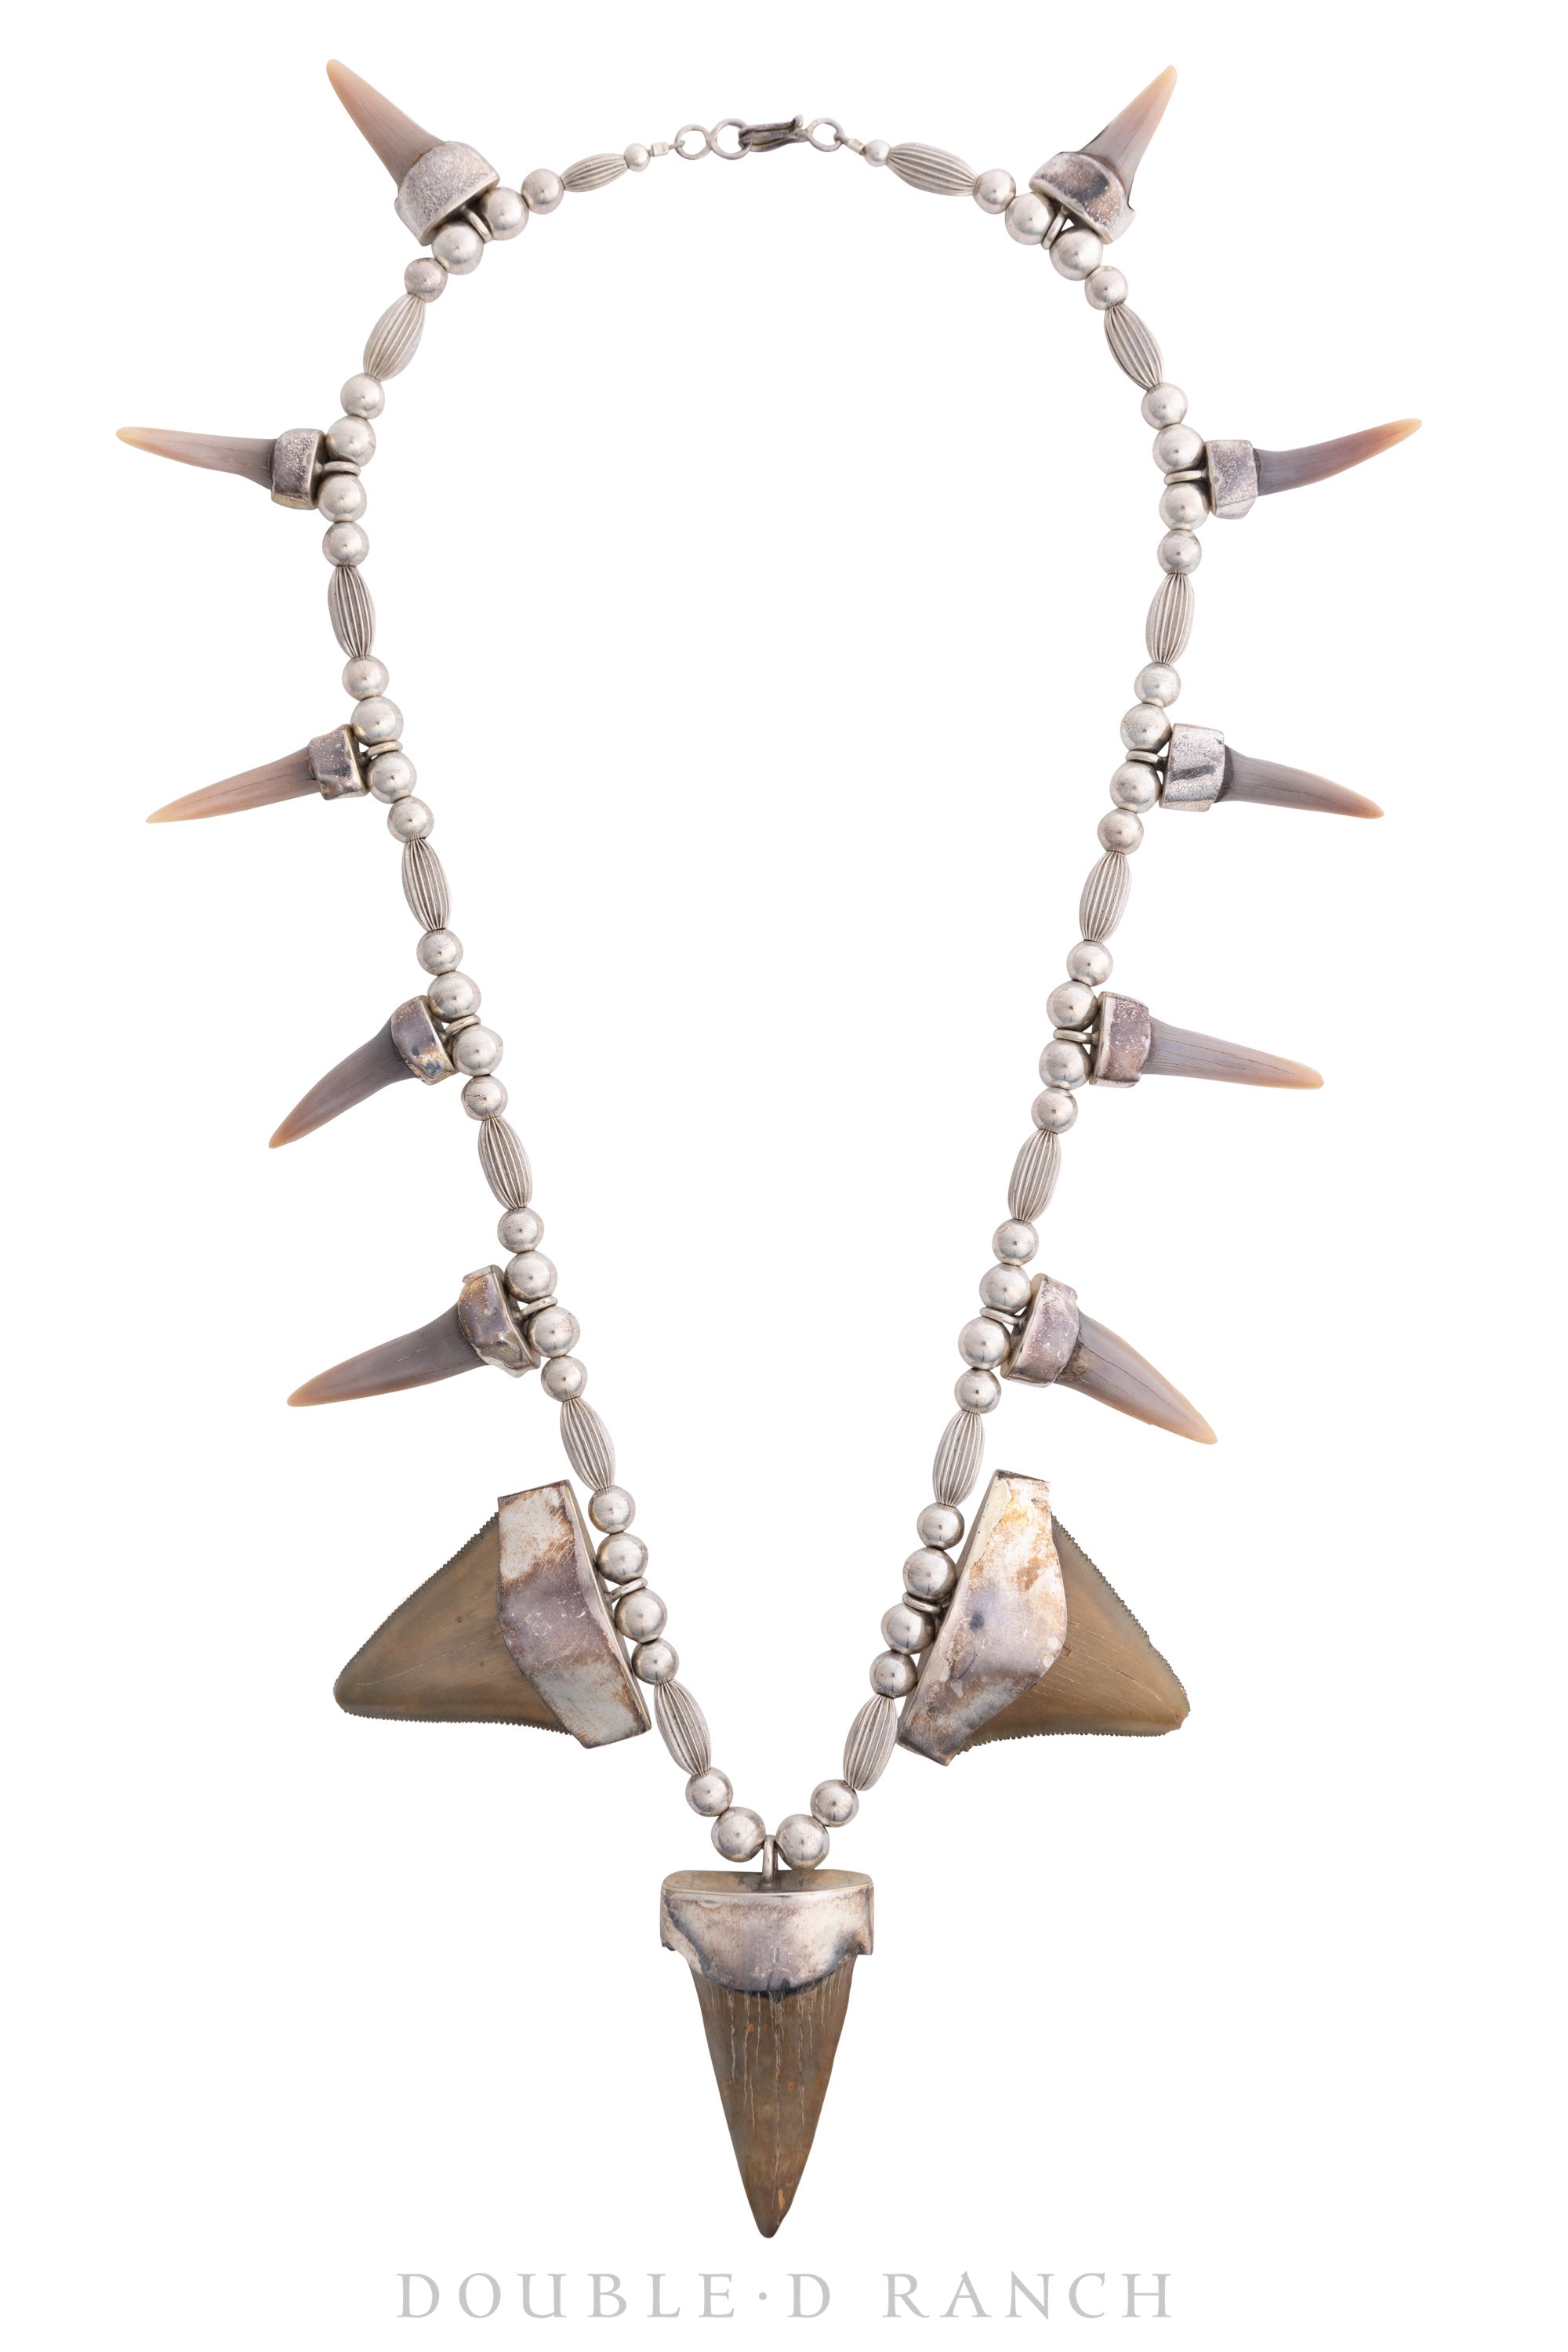 Necklace, Novelty, Fossilized Shark Teeth With Desert Pearls, Vintage, Estate, 1988